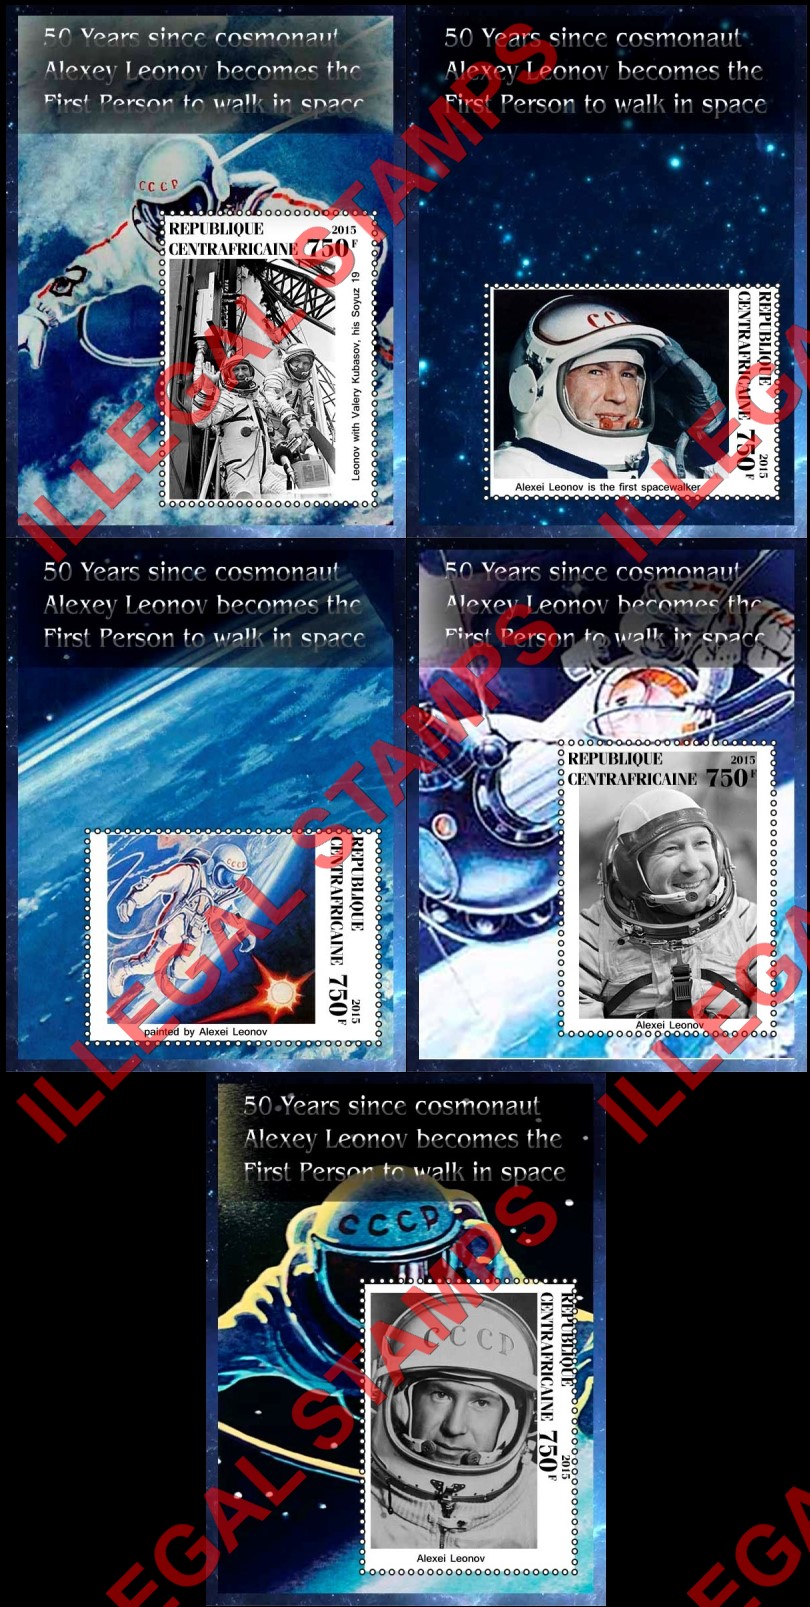 Central African Republic 2015 Space Alexey Leonov Illegal Stamp Souvenir Sheets of 1